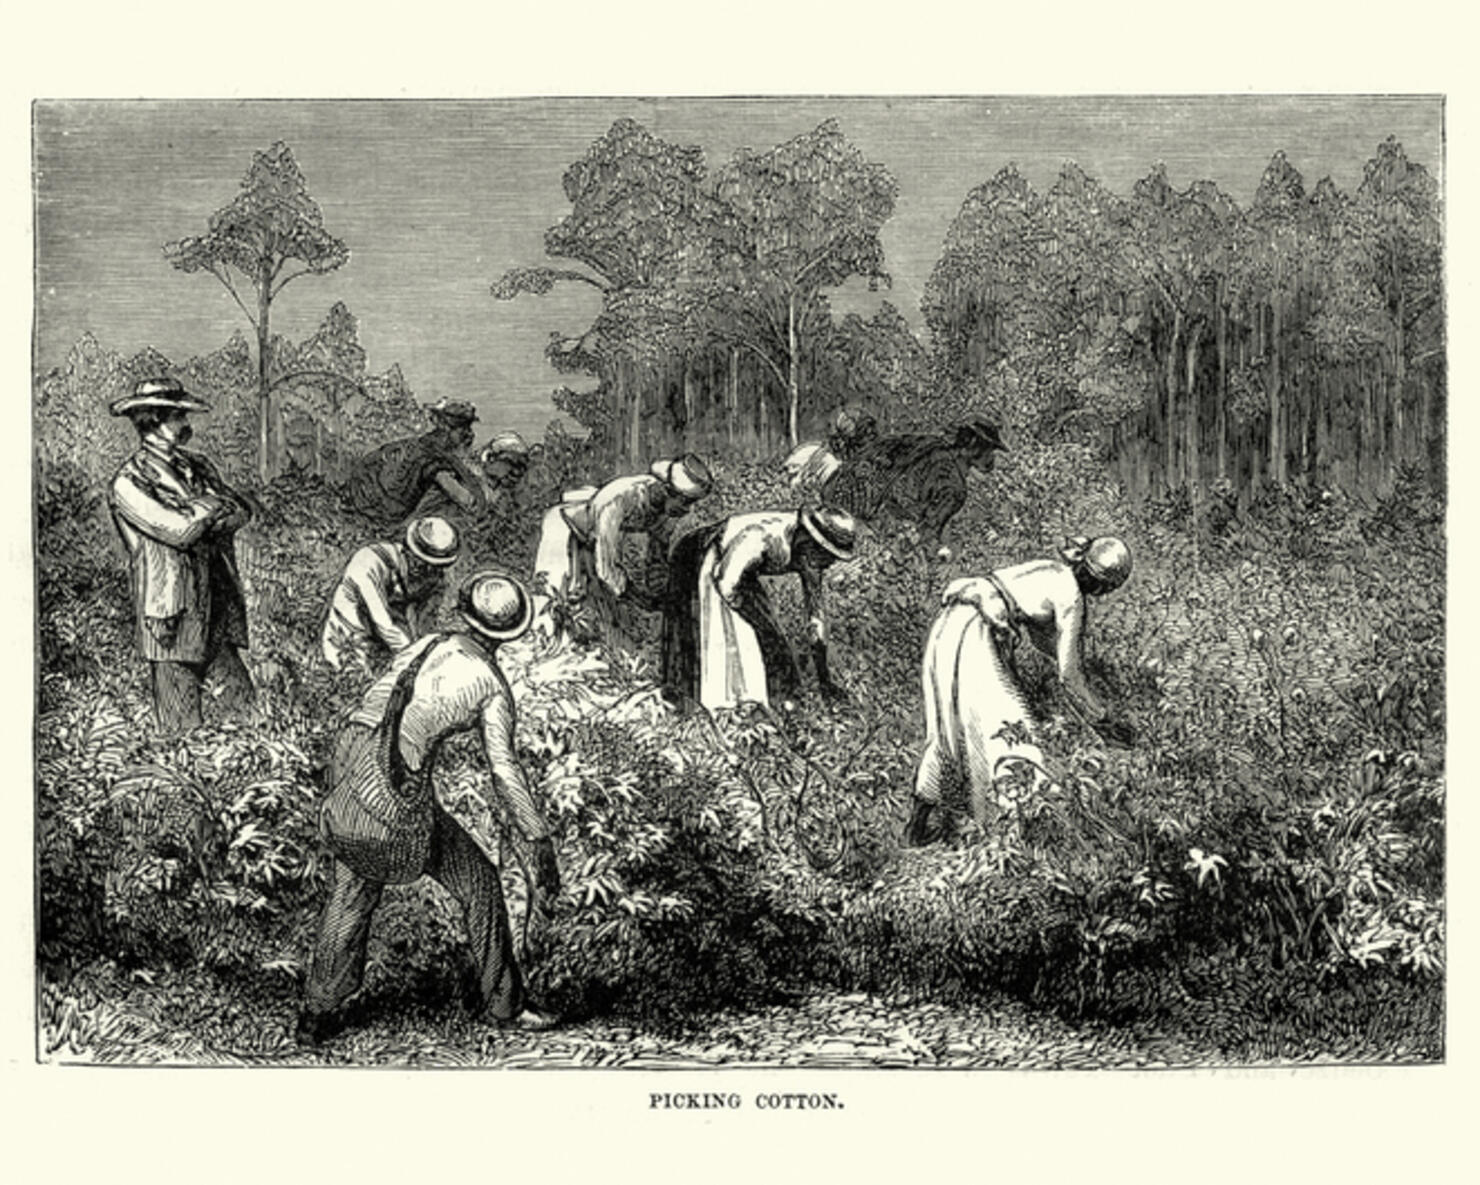 Workers picking cotton, Louisiana, 19th Century